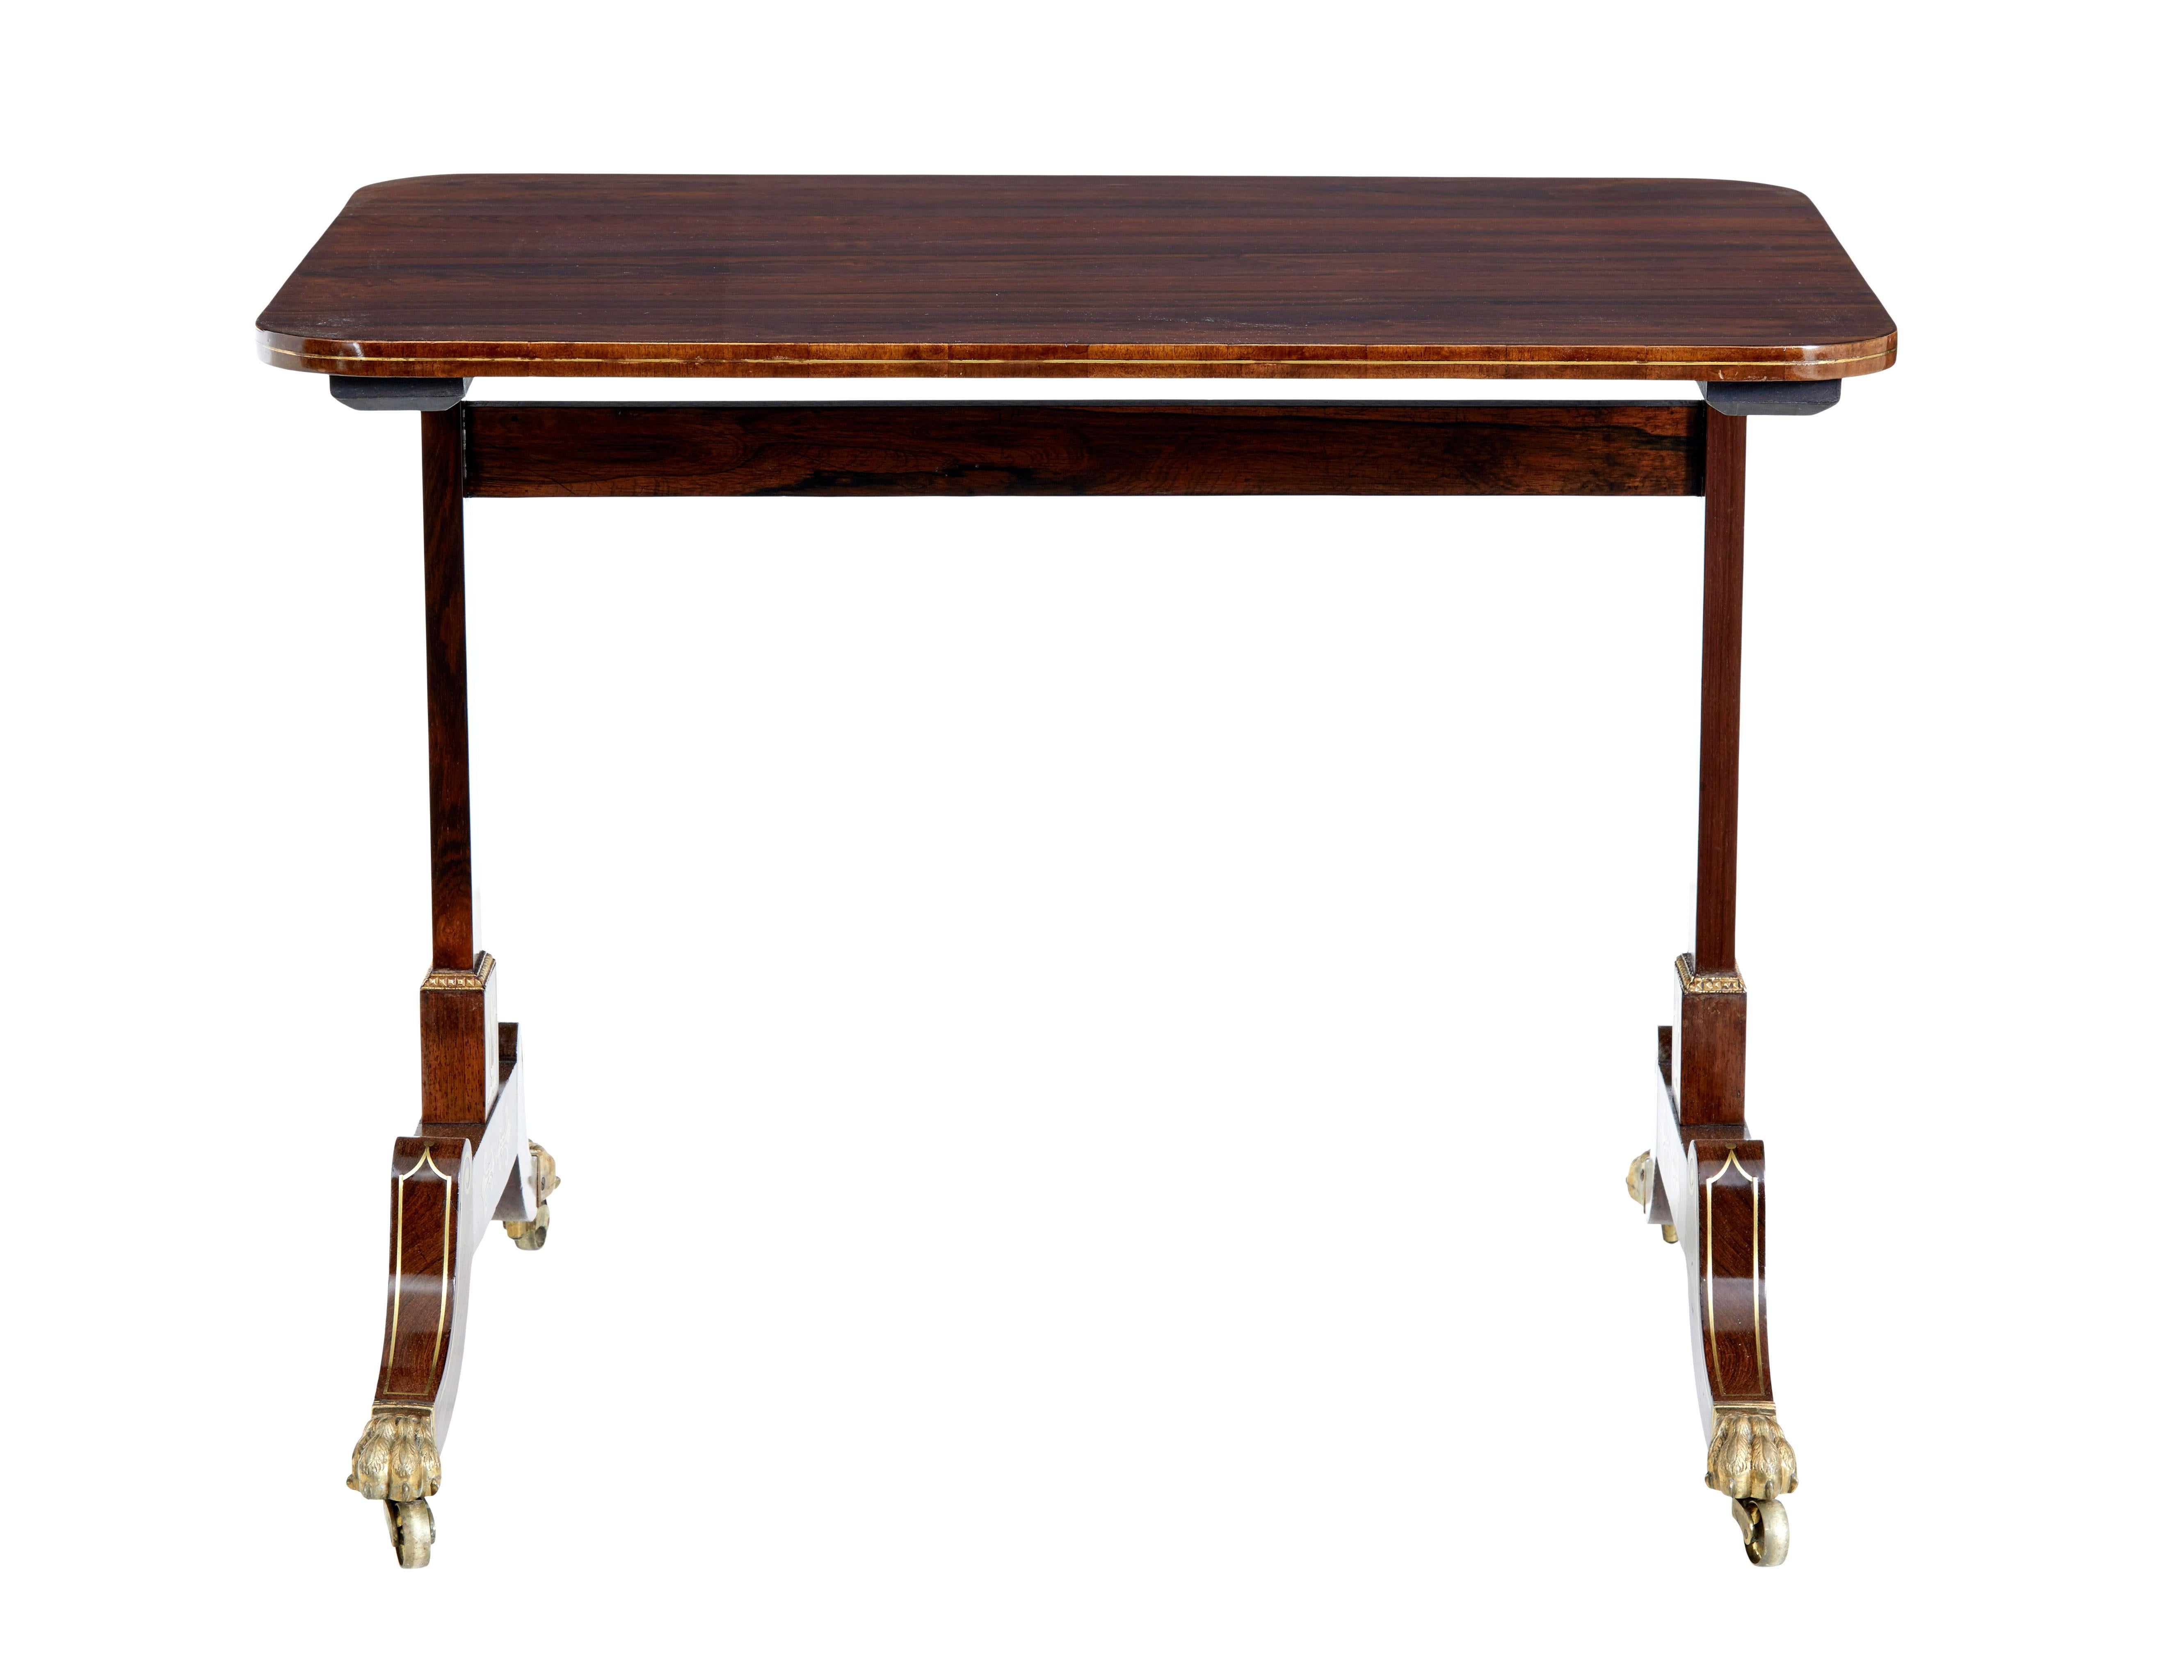 Early 19th century regency brass inlaid palisander occasional side table circa 1820.

Top quality table in good condition. Ideal for use as a side or sofa table.

Rectangular top with rounded edge with brass stringing detail. Straight supports with